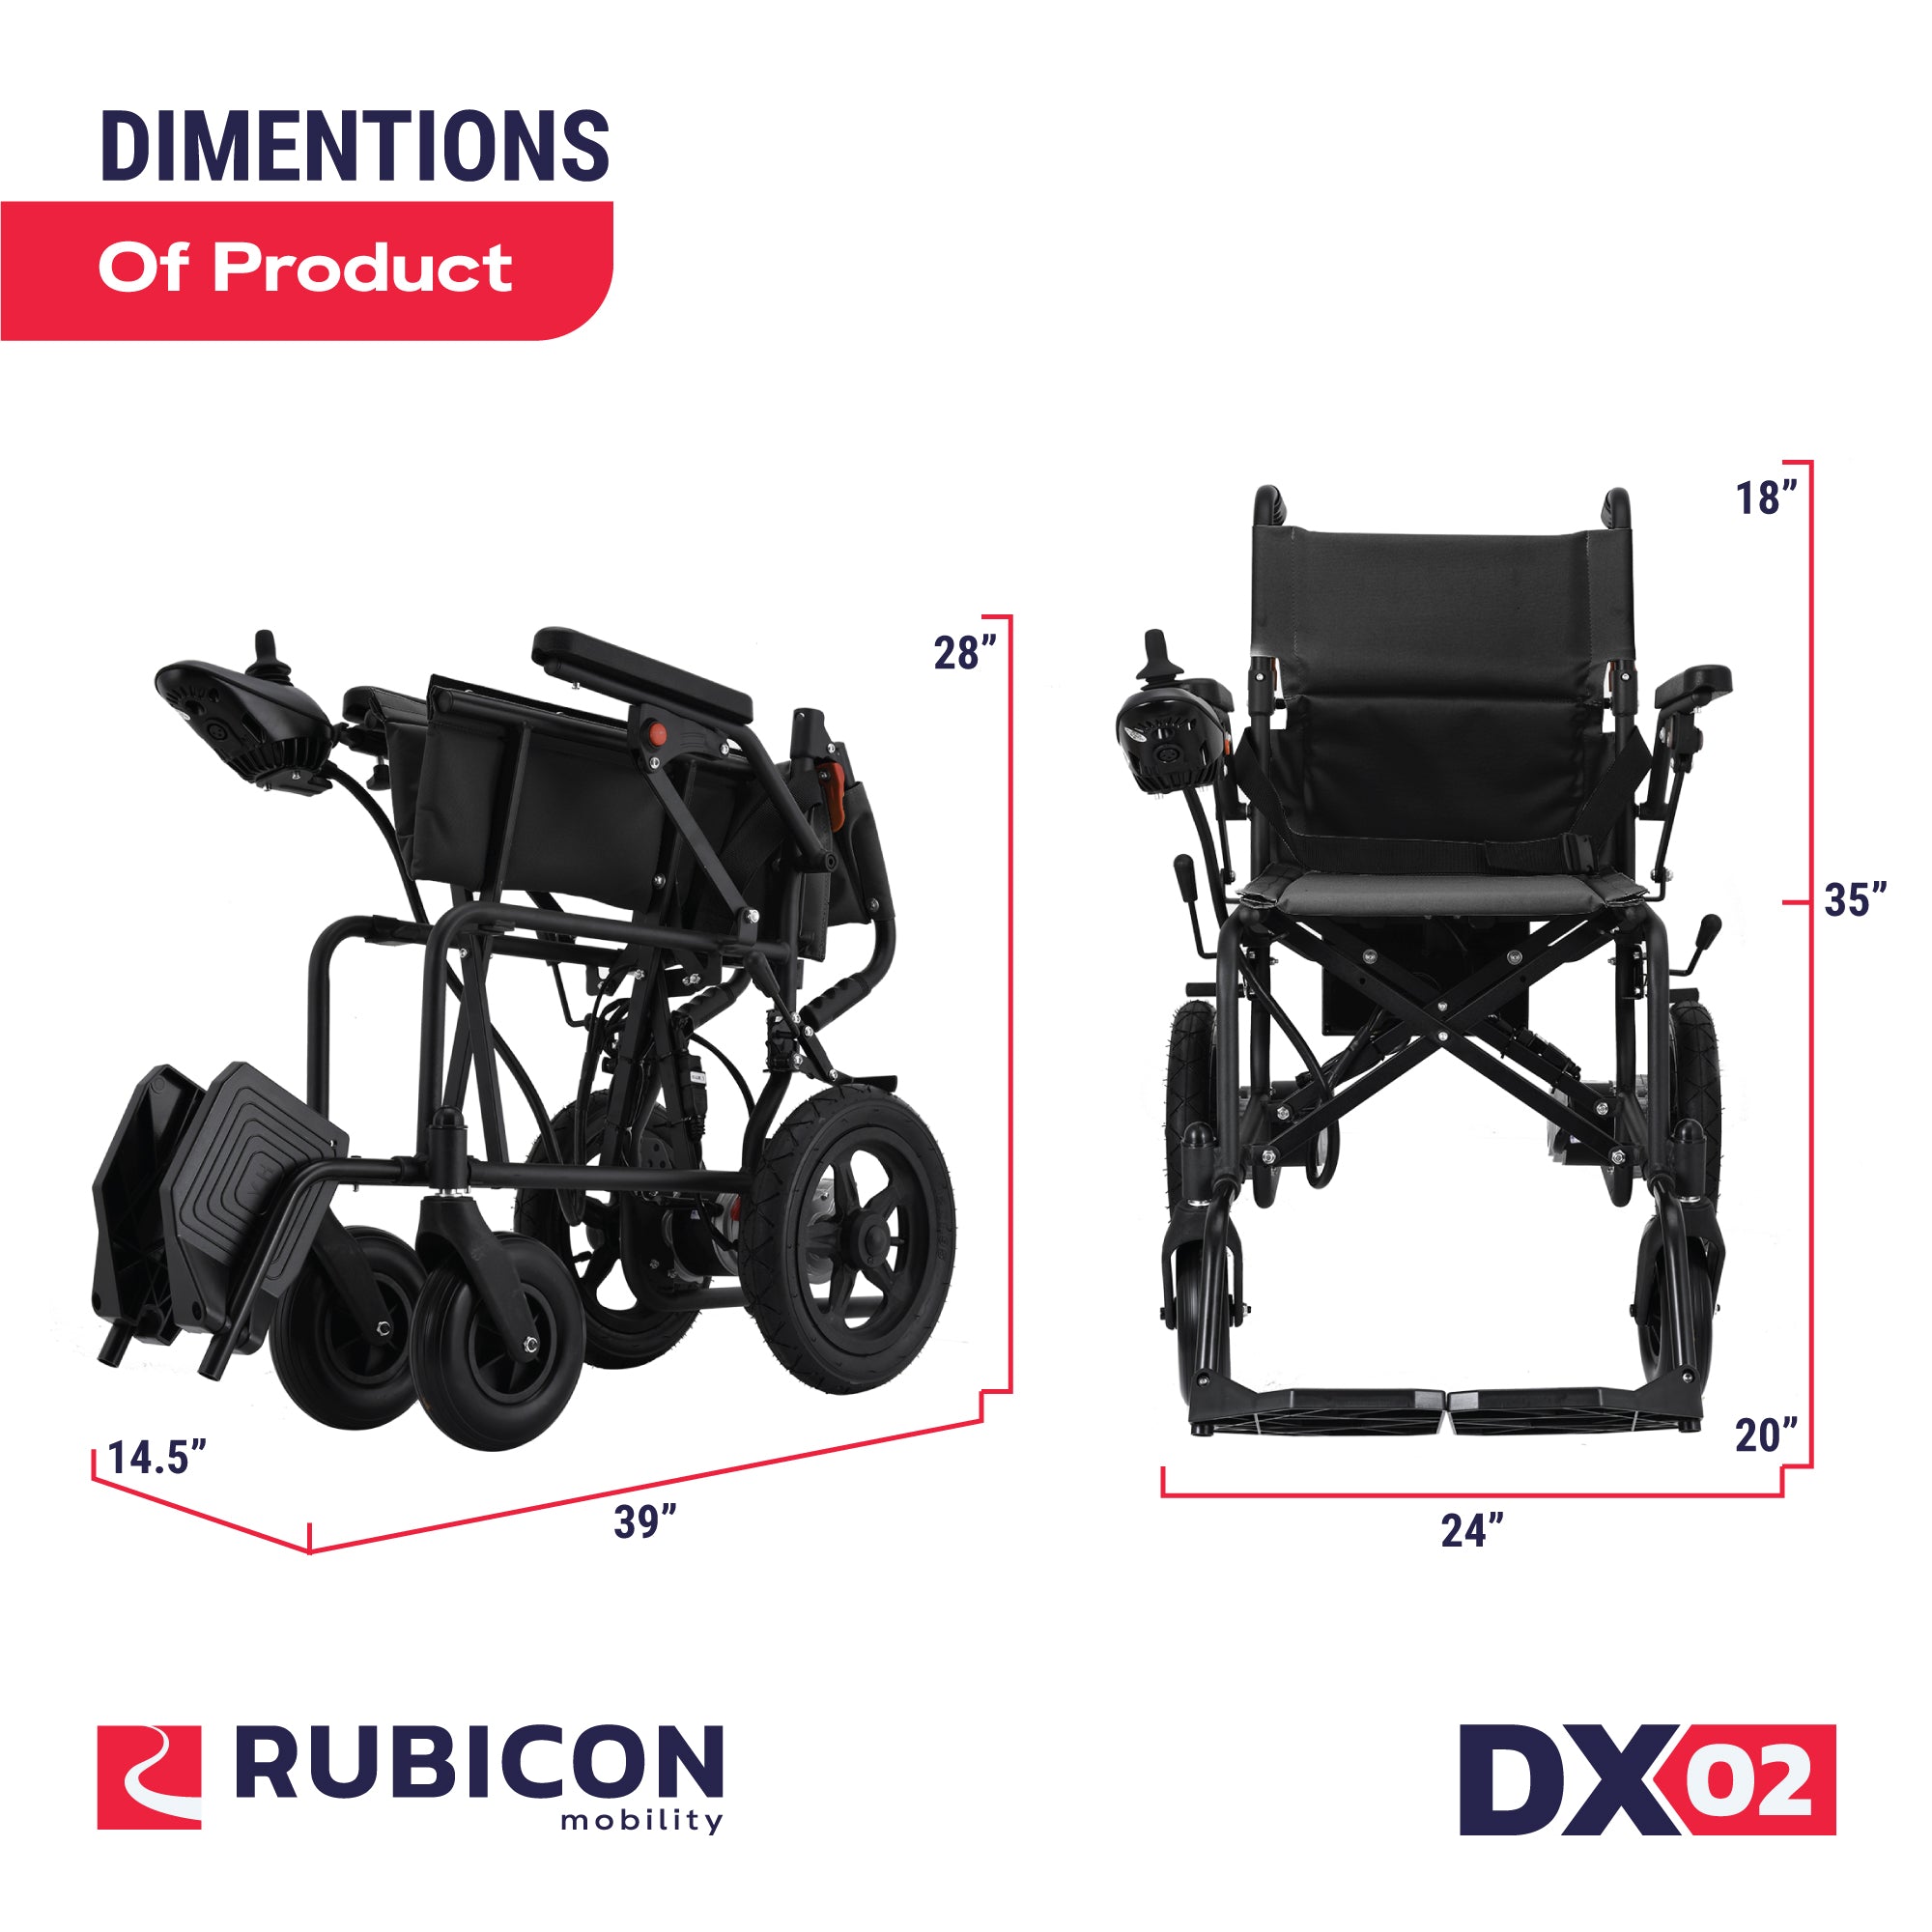 DX02 - Lightweight and Powerful Electric Wheelchair